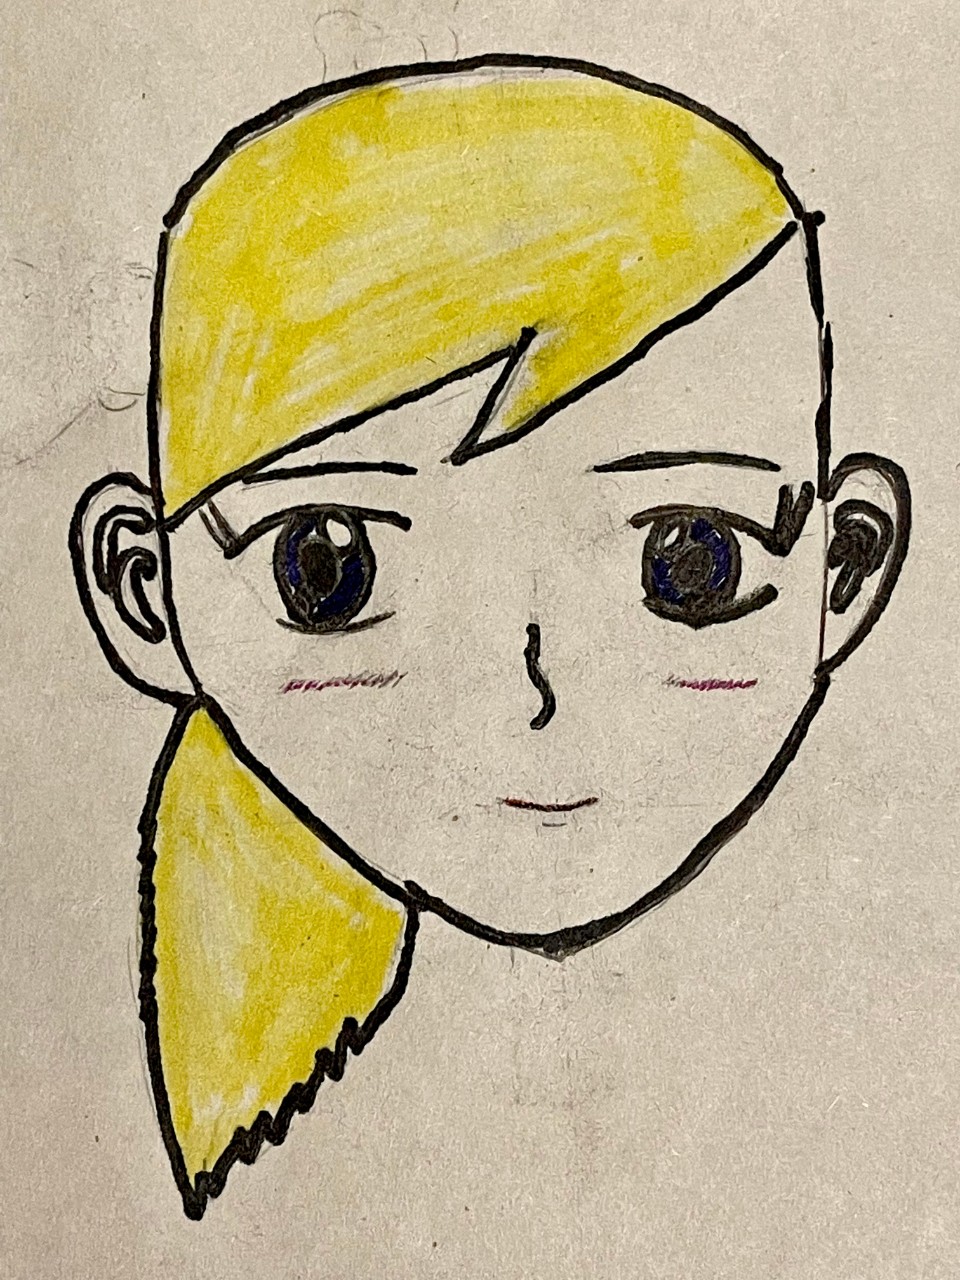 A simple pen or marker sketch of the outline of a girl’s face in the style of many anime drawings. She has yellow hair in a side ponytail and large black eyes and a small smile.